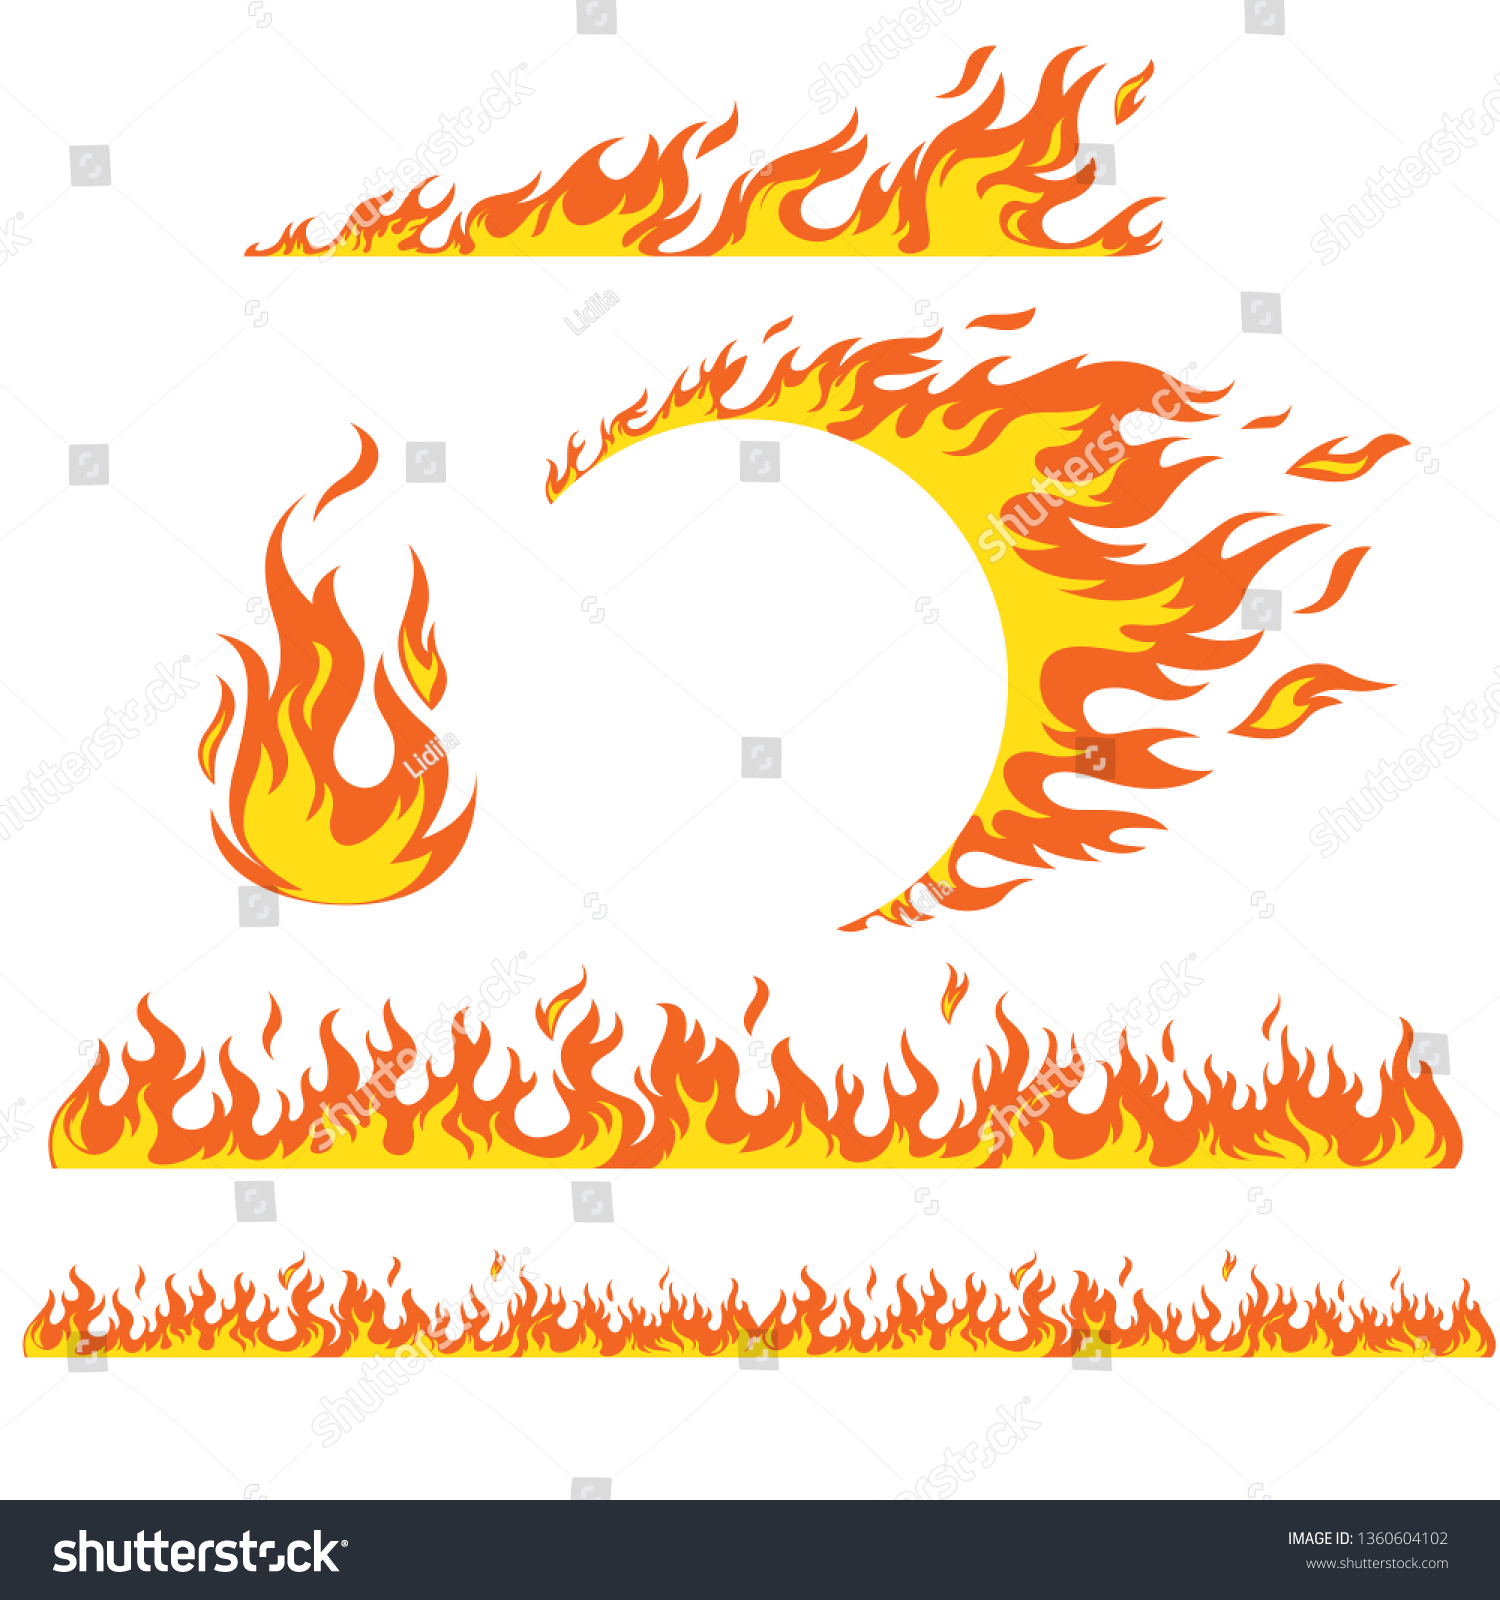 stock-vector-set-of-flame-elements-on-a-white-background-fire-horizontal-pattern-of-fire-fire-around-the-1360604102.jpg